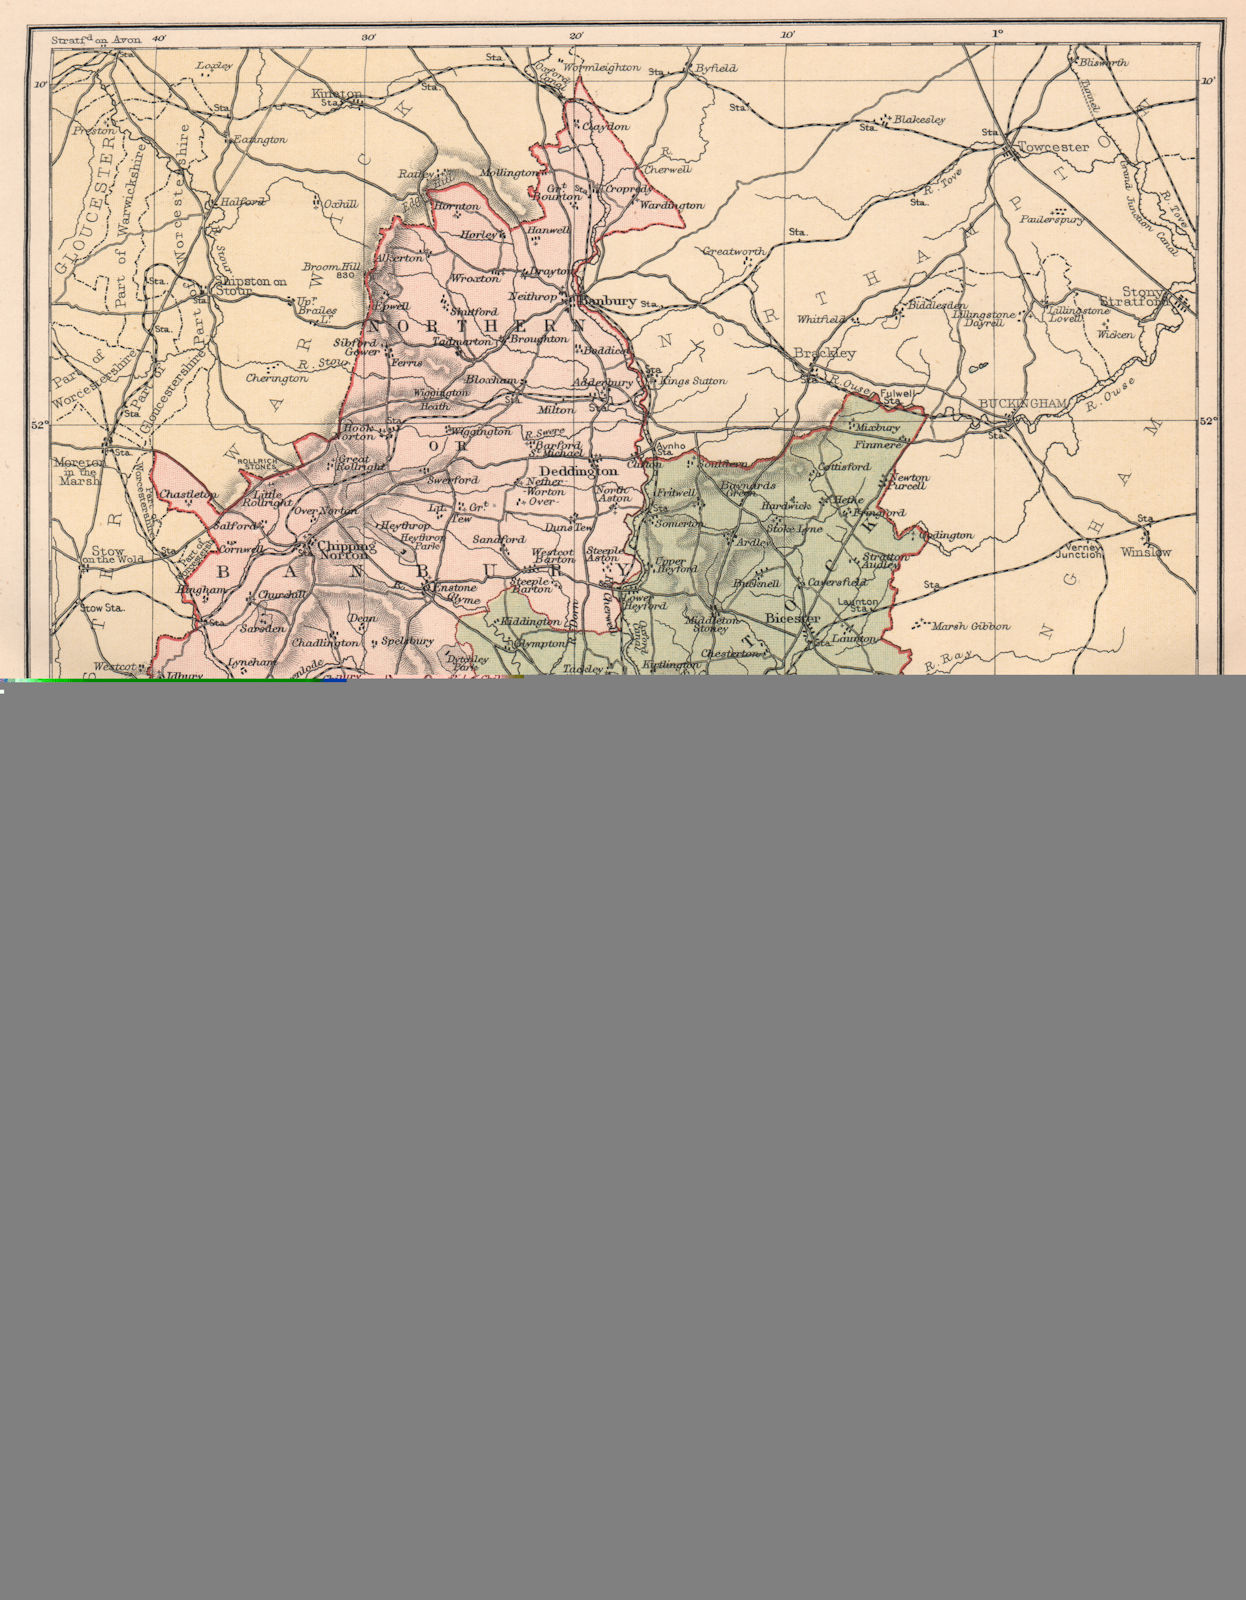 Associate Product OXFORDSHIRE. Antique county map 1893 old vintage plan chart